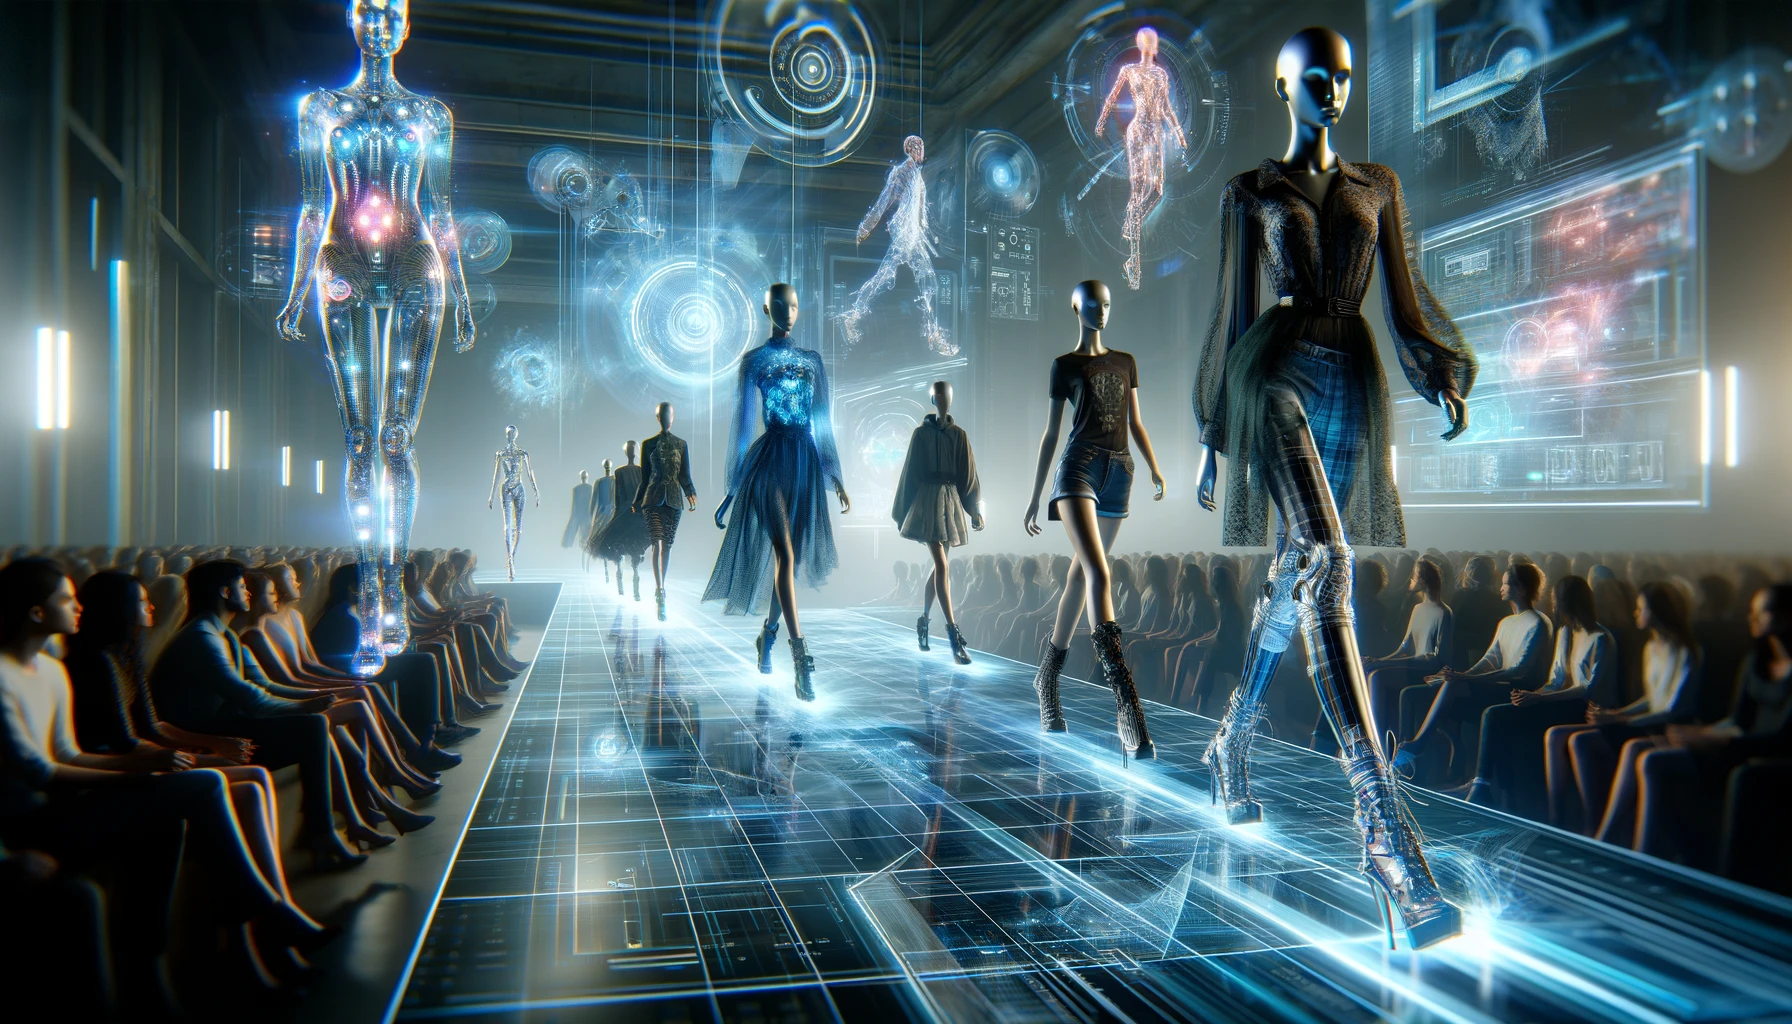 Virtual runway scene with digital models wearing avant-garde, 3D modeled outfits against a dynamic, futuristic backdrop, showcasing the blend of technology and fashion in the industry.